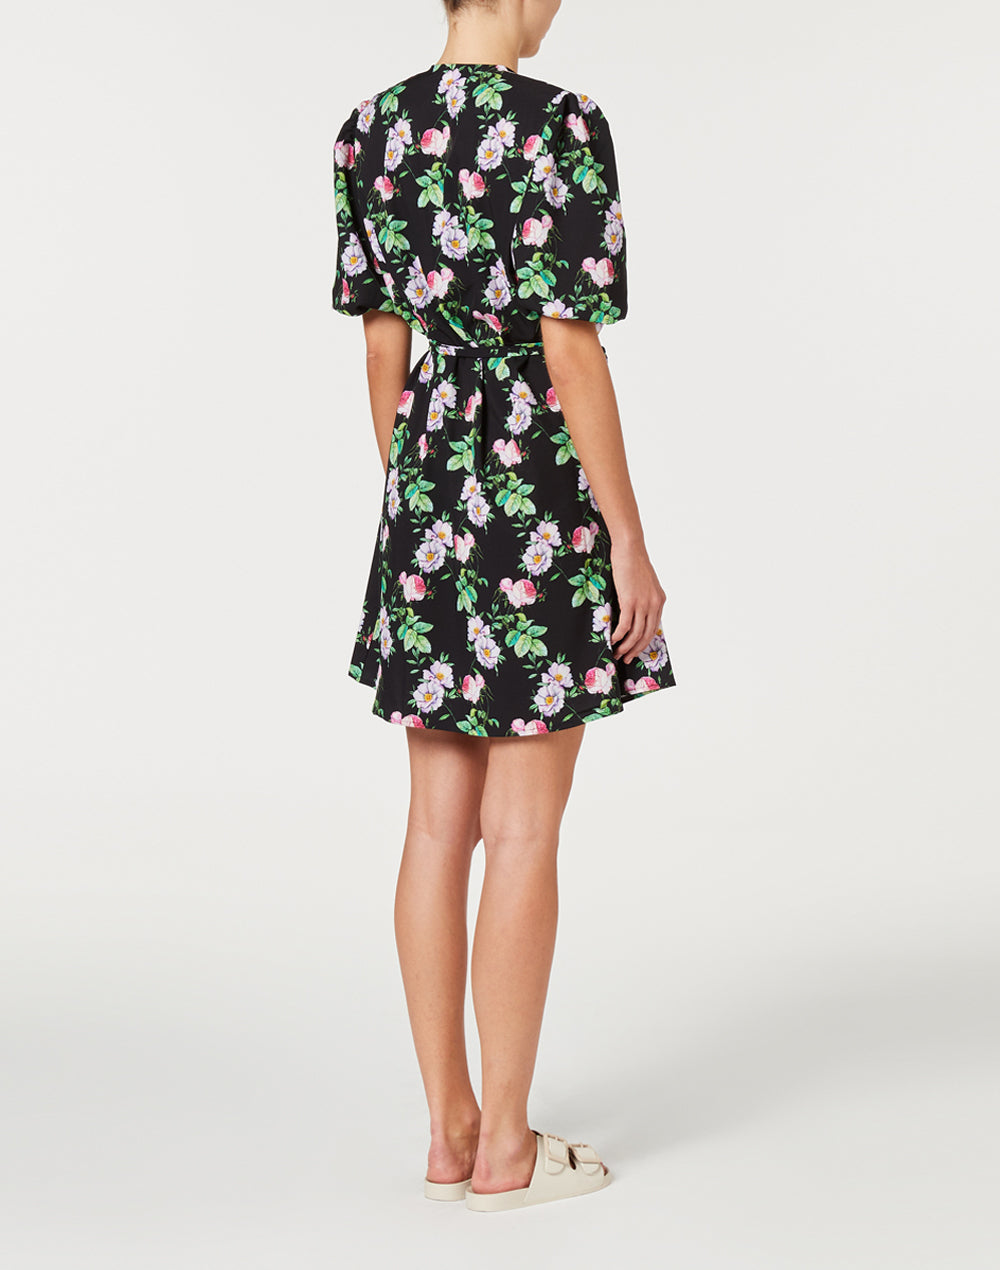 DRESS WITH FLORAL PRINT